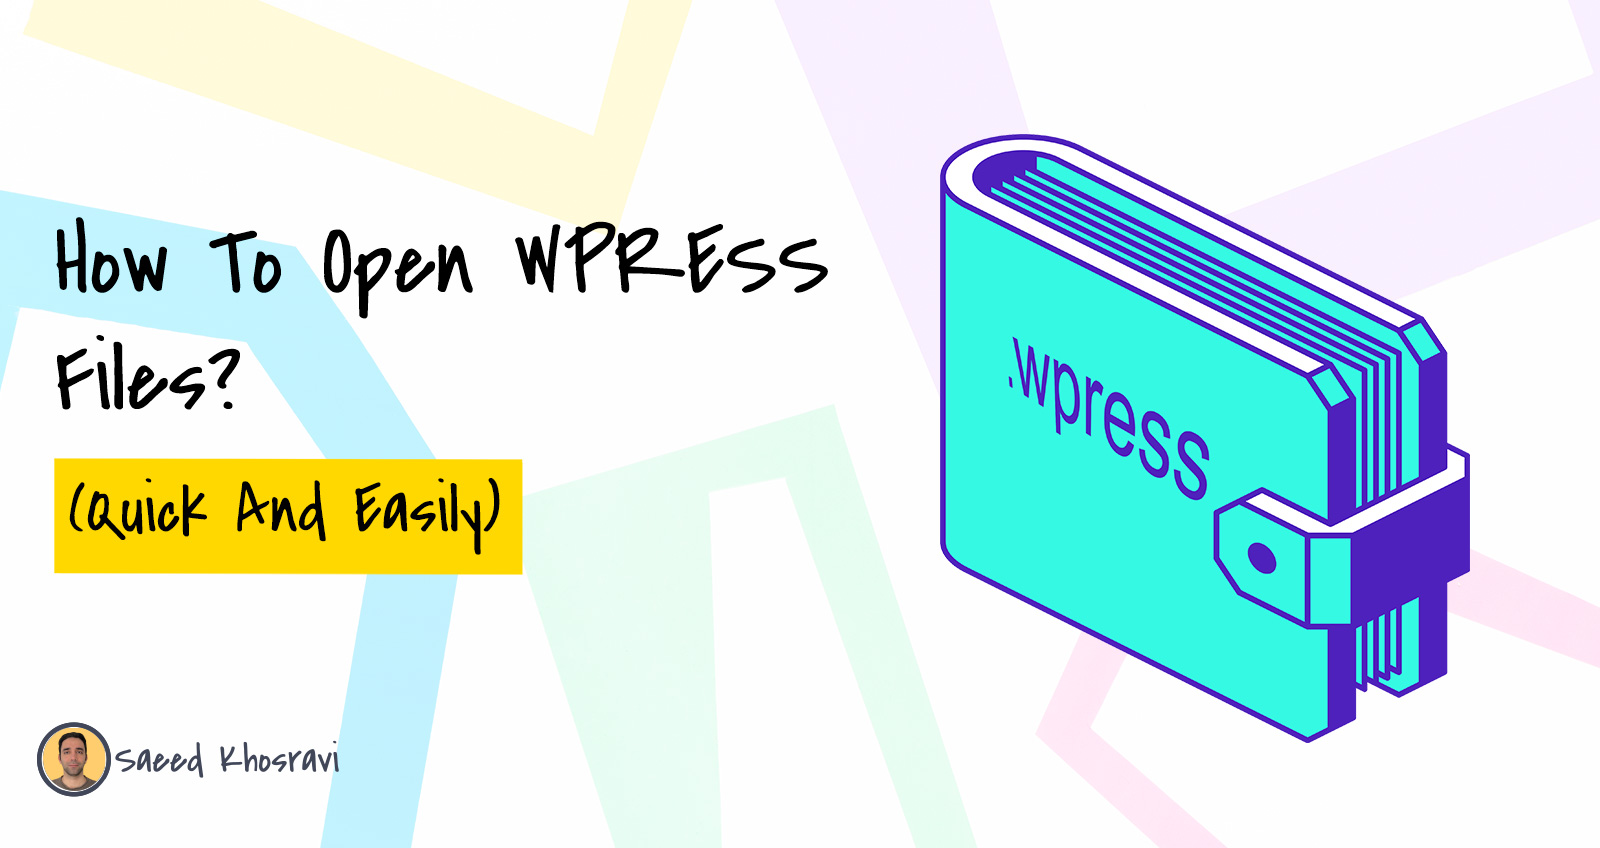 How to Open WPRESS Files